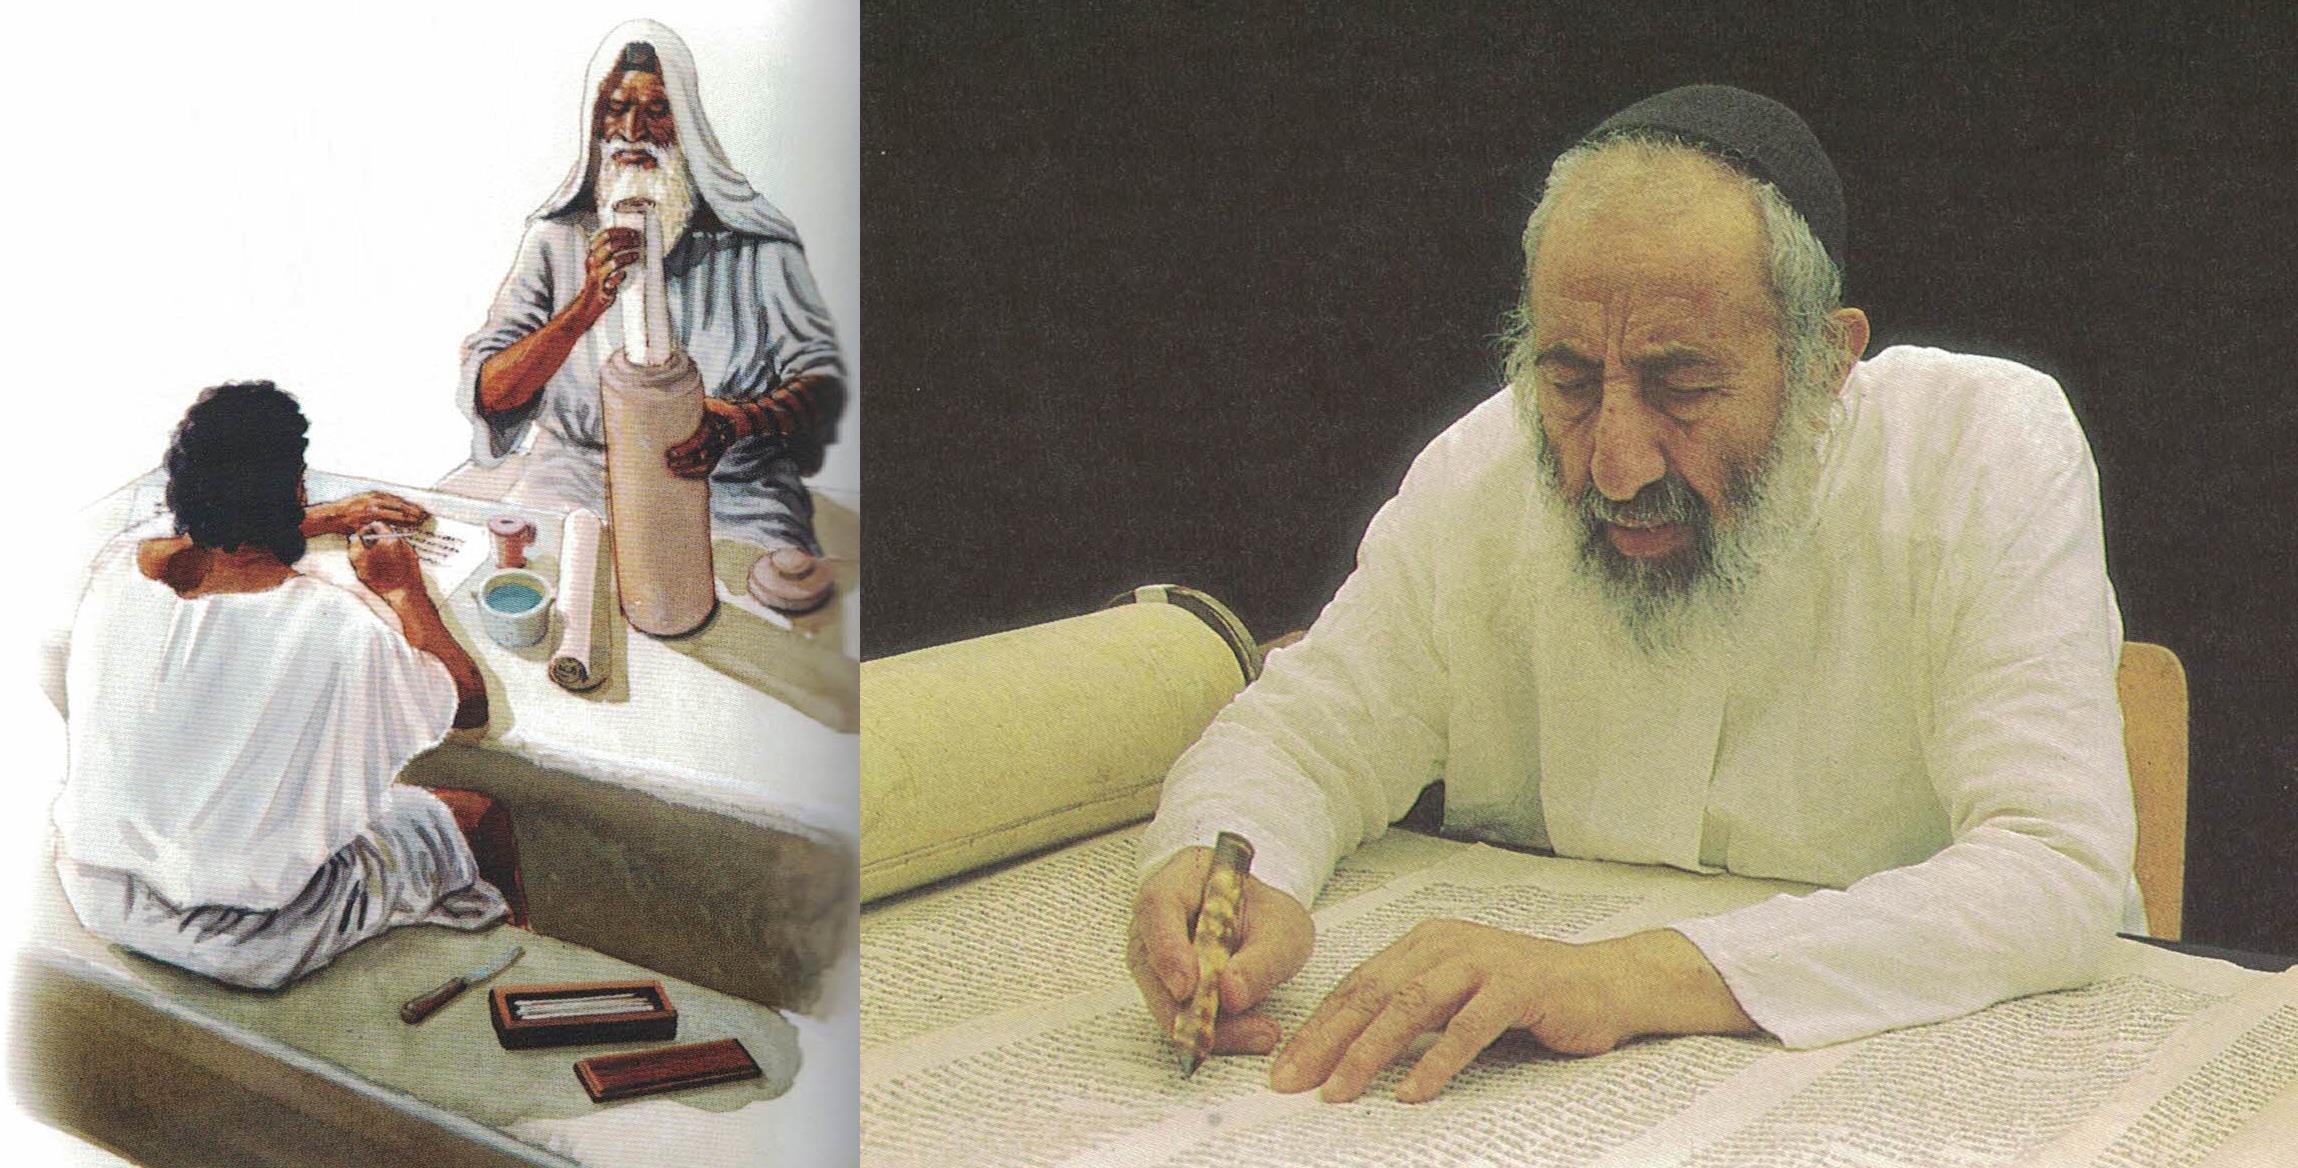 artwork of 2 scribes working with scrolls and a picture of modern Jew writing on a scroll